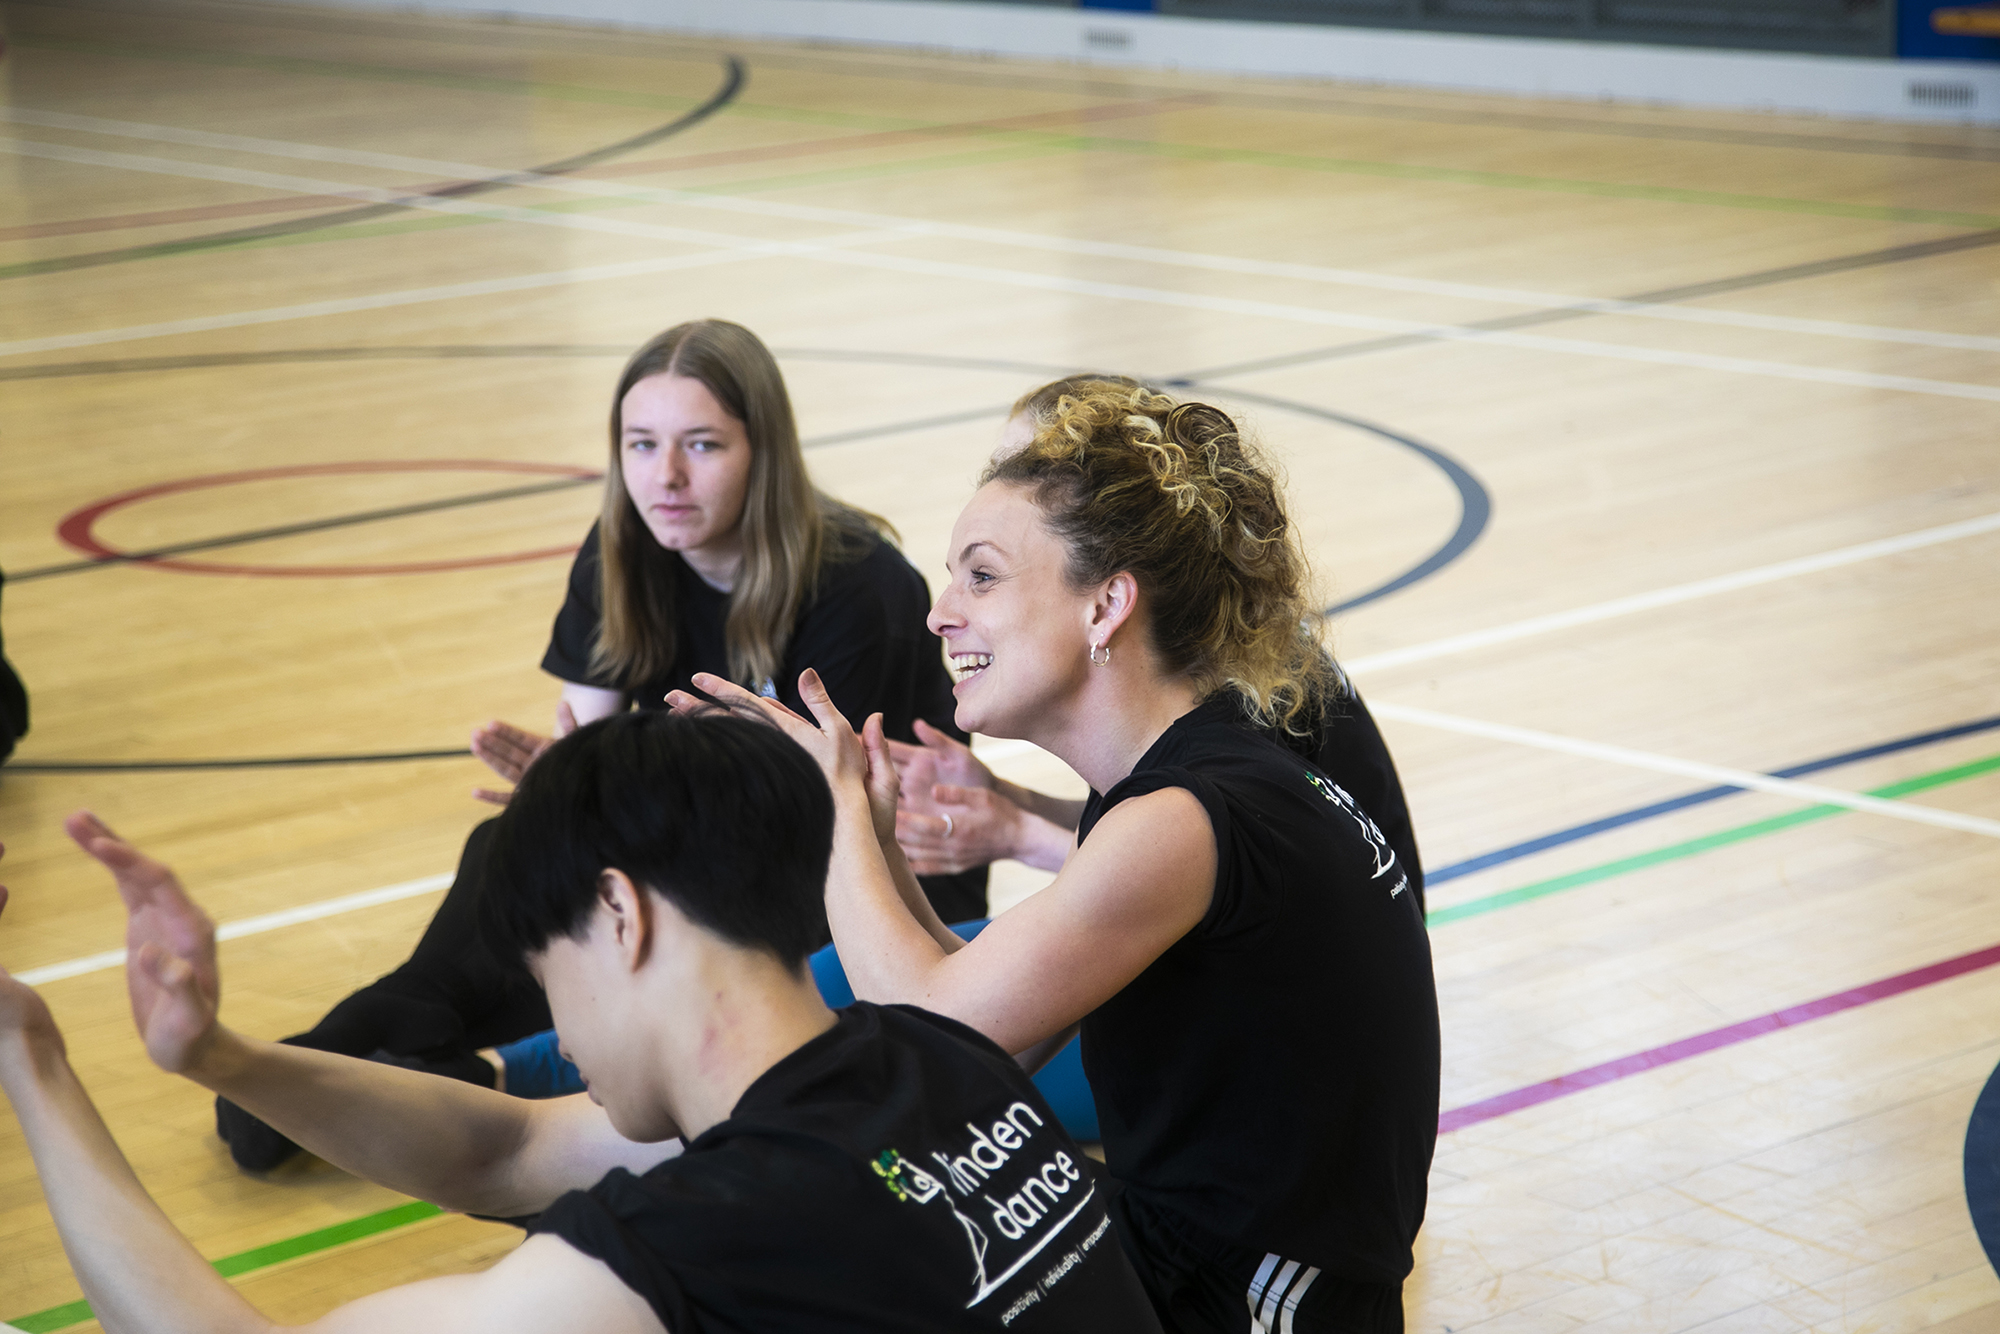 white female teacher with teenage student sitting on a sports hall floor with hands gesturing. All wearing black with linden dance logo on the t-shirts. 